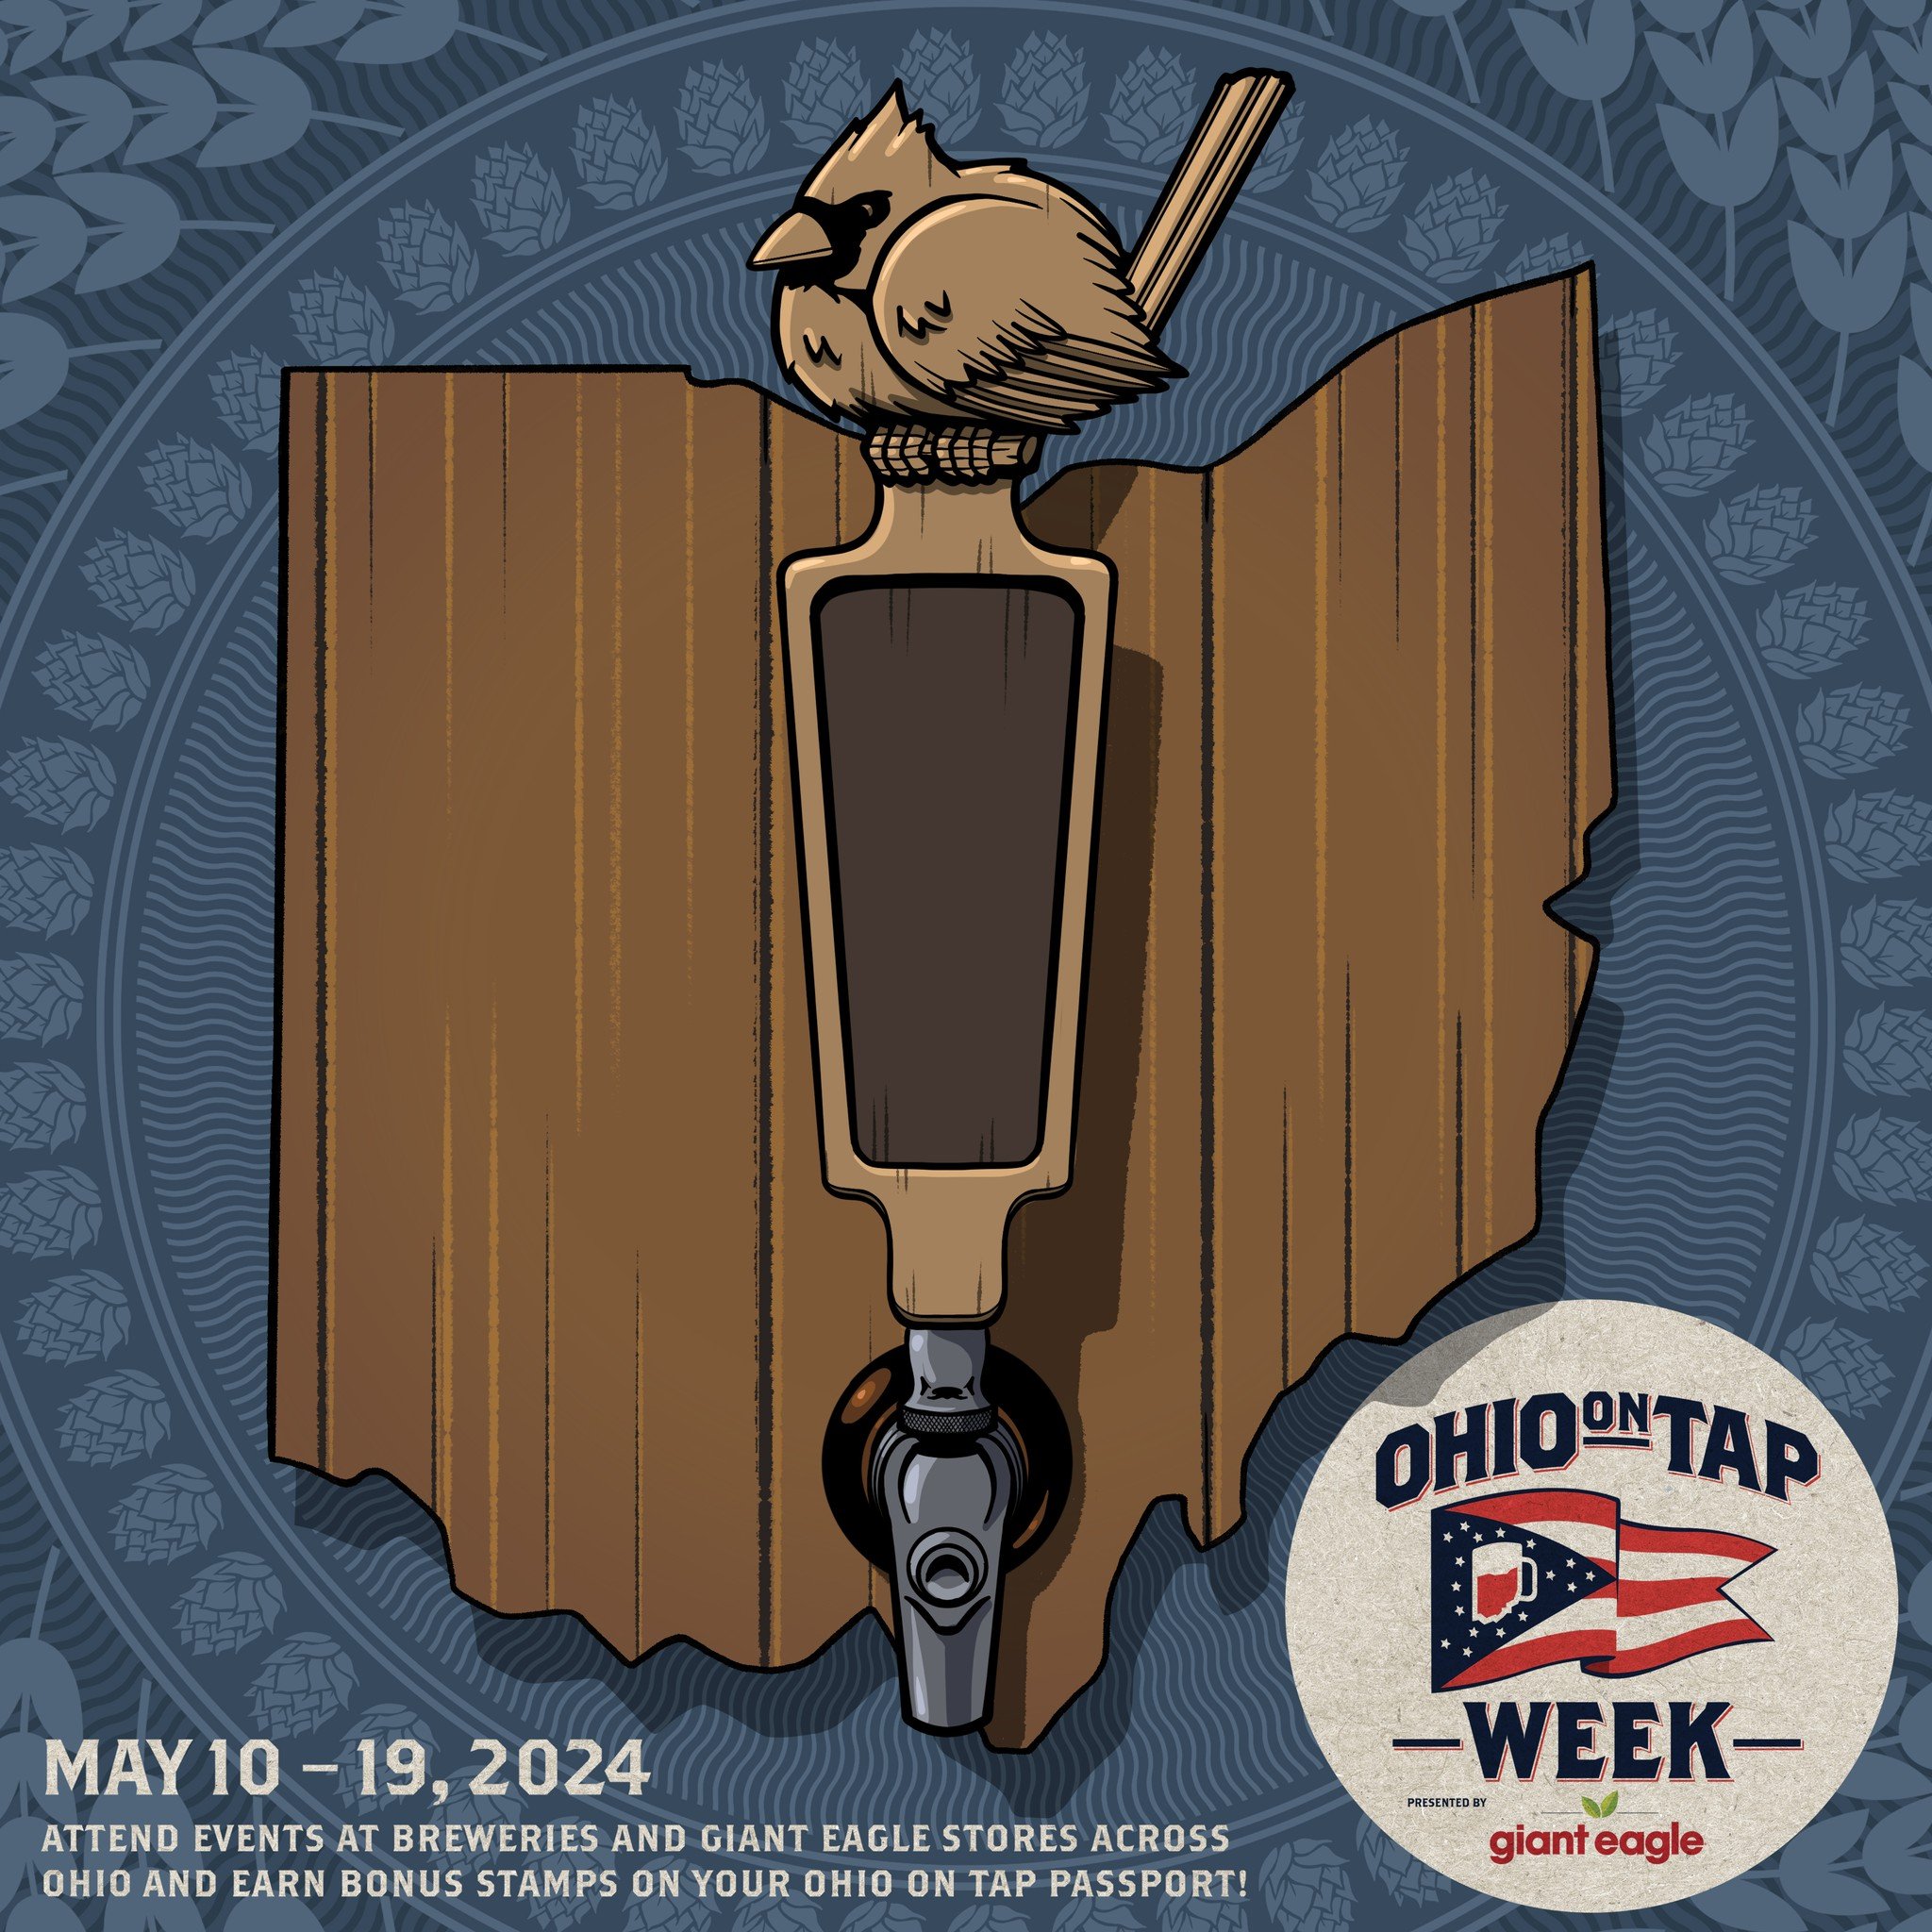 Tomorrow starts Ohio on Tap week and we're celebrating all week long! Join us at the Mason Taproom &amp; Beer Garden and enjoy $1 off all draft Fresh Picks R&amp;D Beers from May 10th to May 19th. See you soon 🍻

#SonderBrewing #UniquelyCrafted